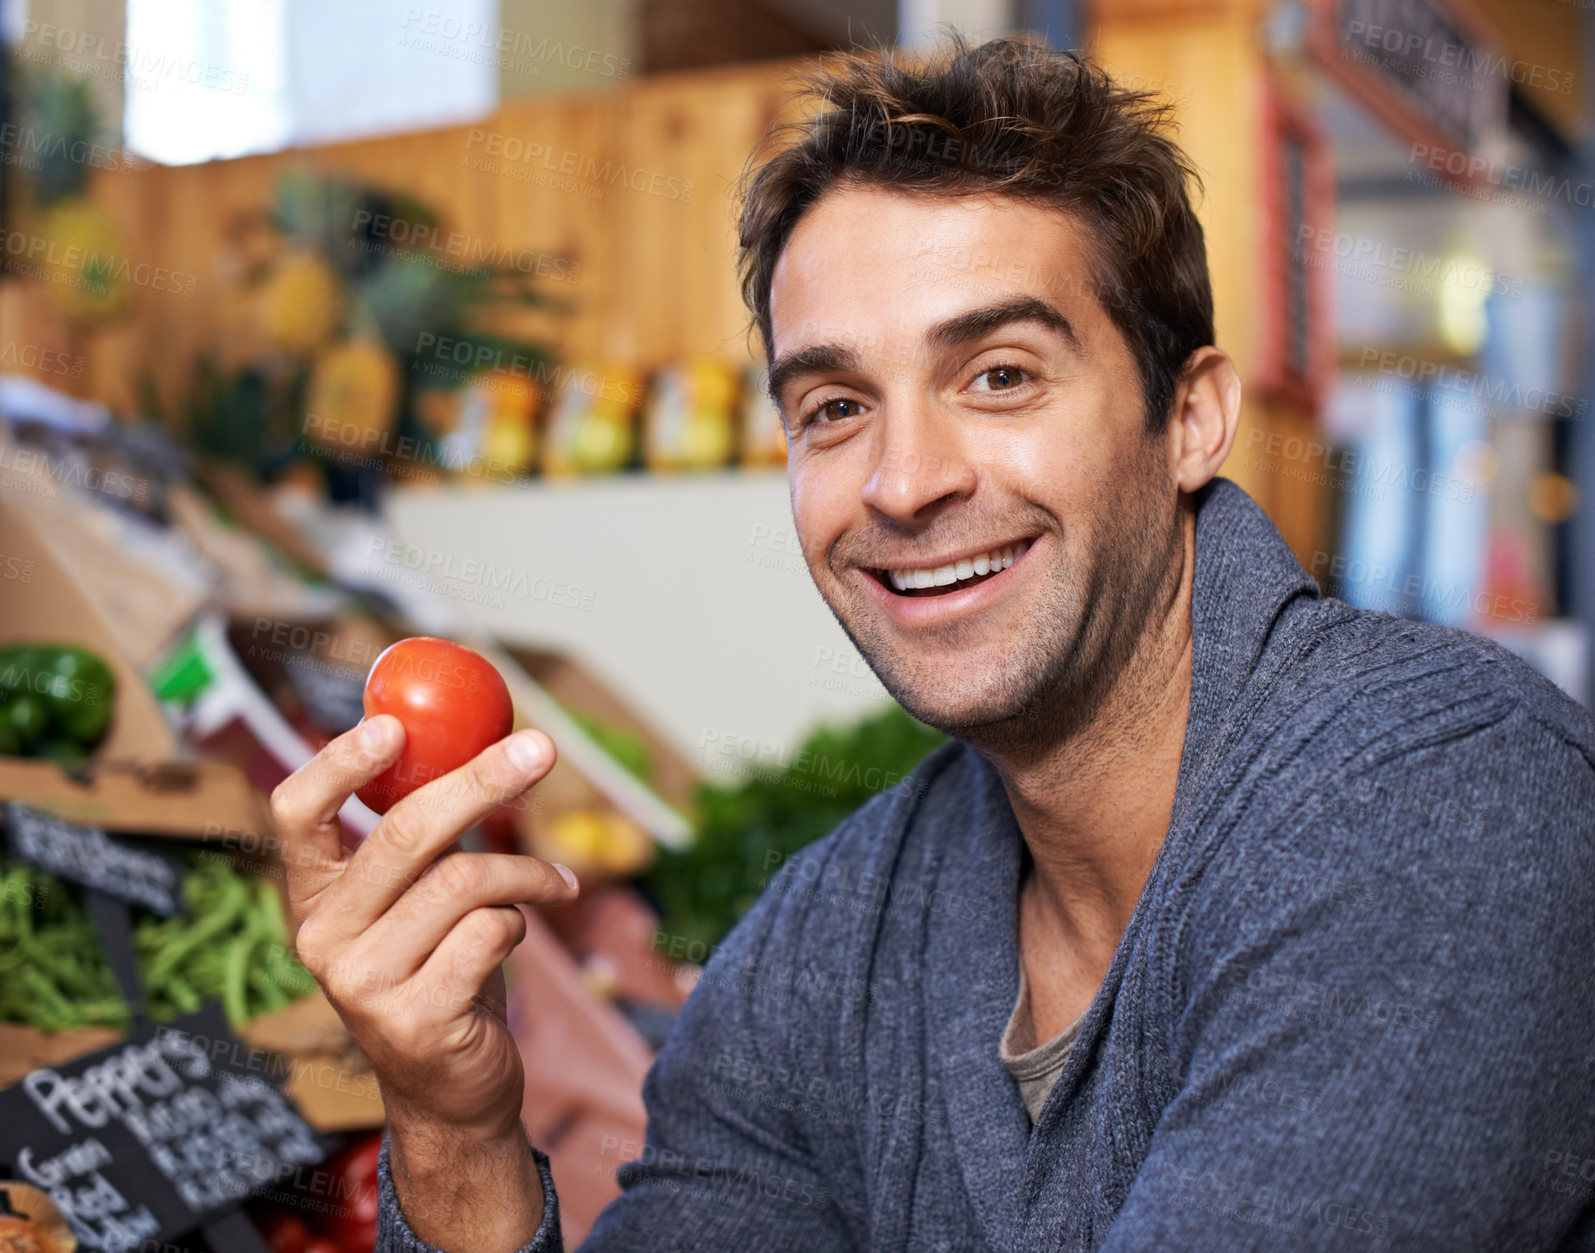 Buy stock photo Tomato, portrait or happy man shopping at a supermarket for grocery promotions, sale or discounts deal. Smile, retail or customer buying groceries for healthy nutrition, organic vegetables or food